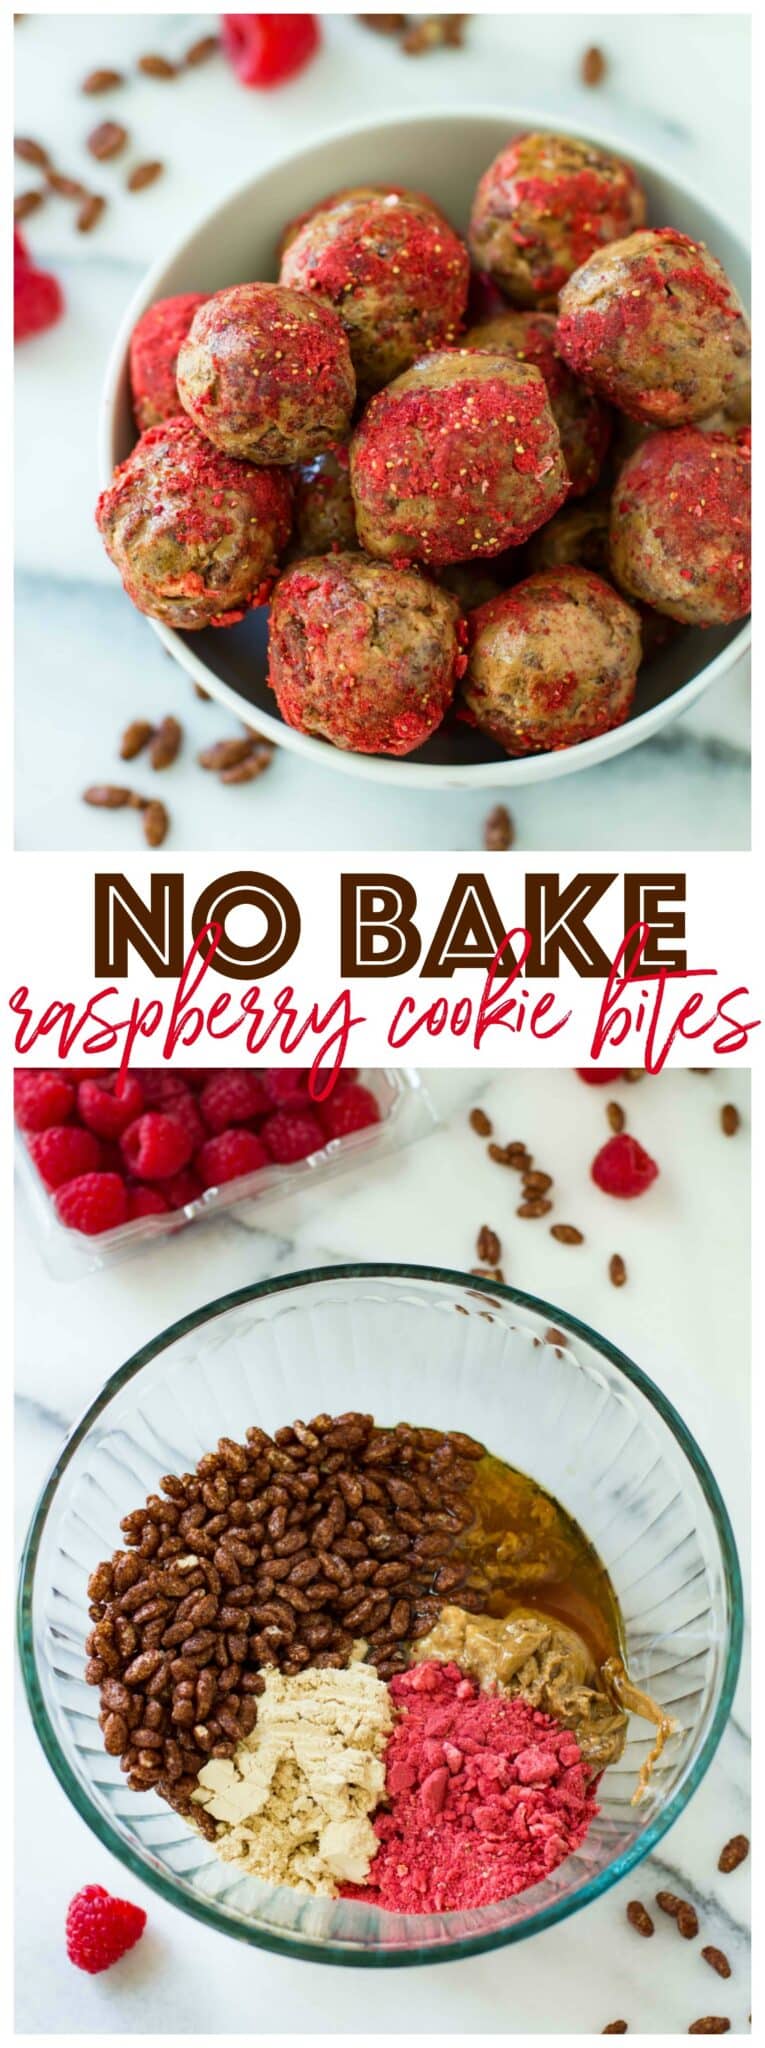 Easy, 6-ingredient no bake raspberry cookie bites with a perfect sweet-tart flavor and a delicious crispy crunch! Pair these with Chambord Spritzes for the ultimate girls' night treat!